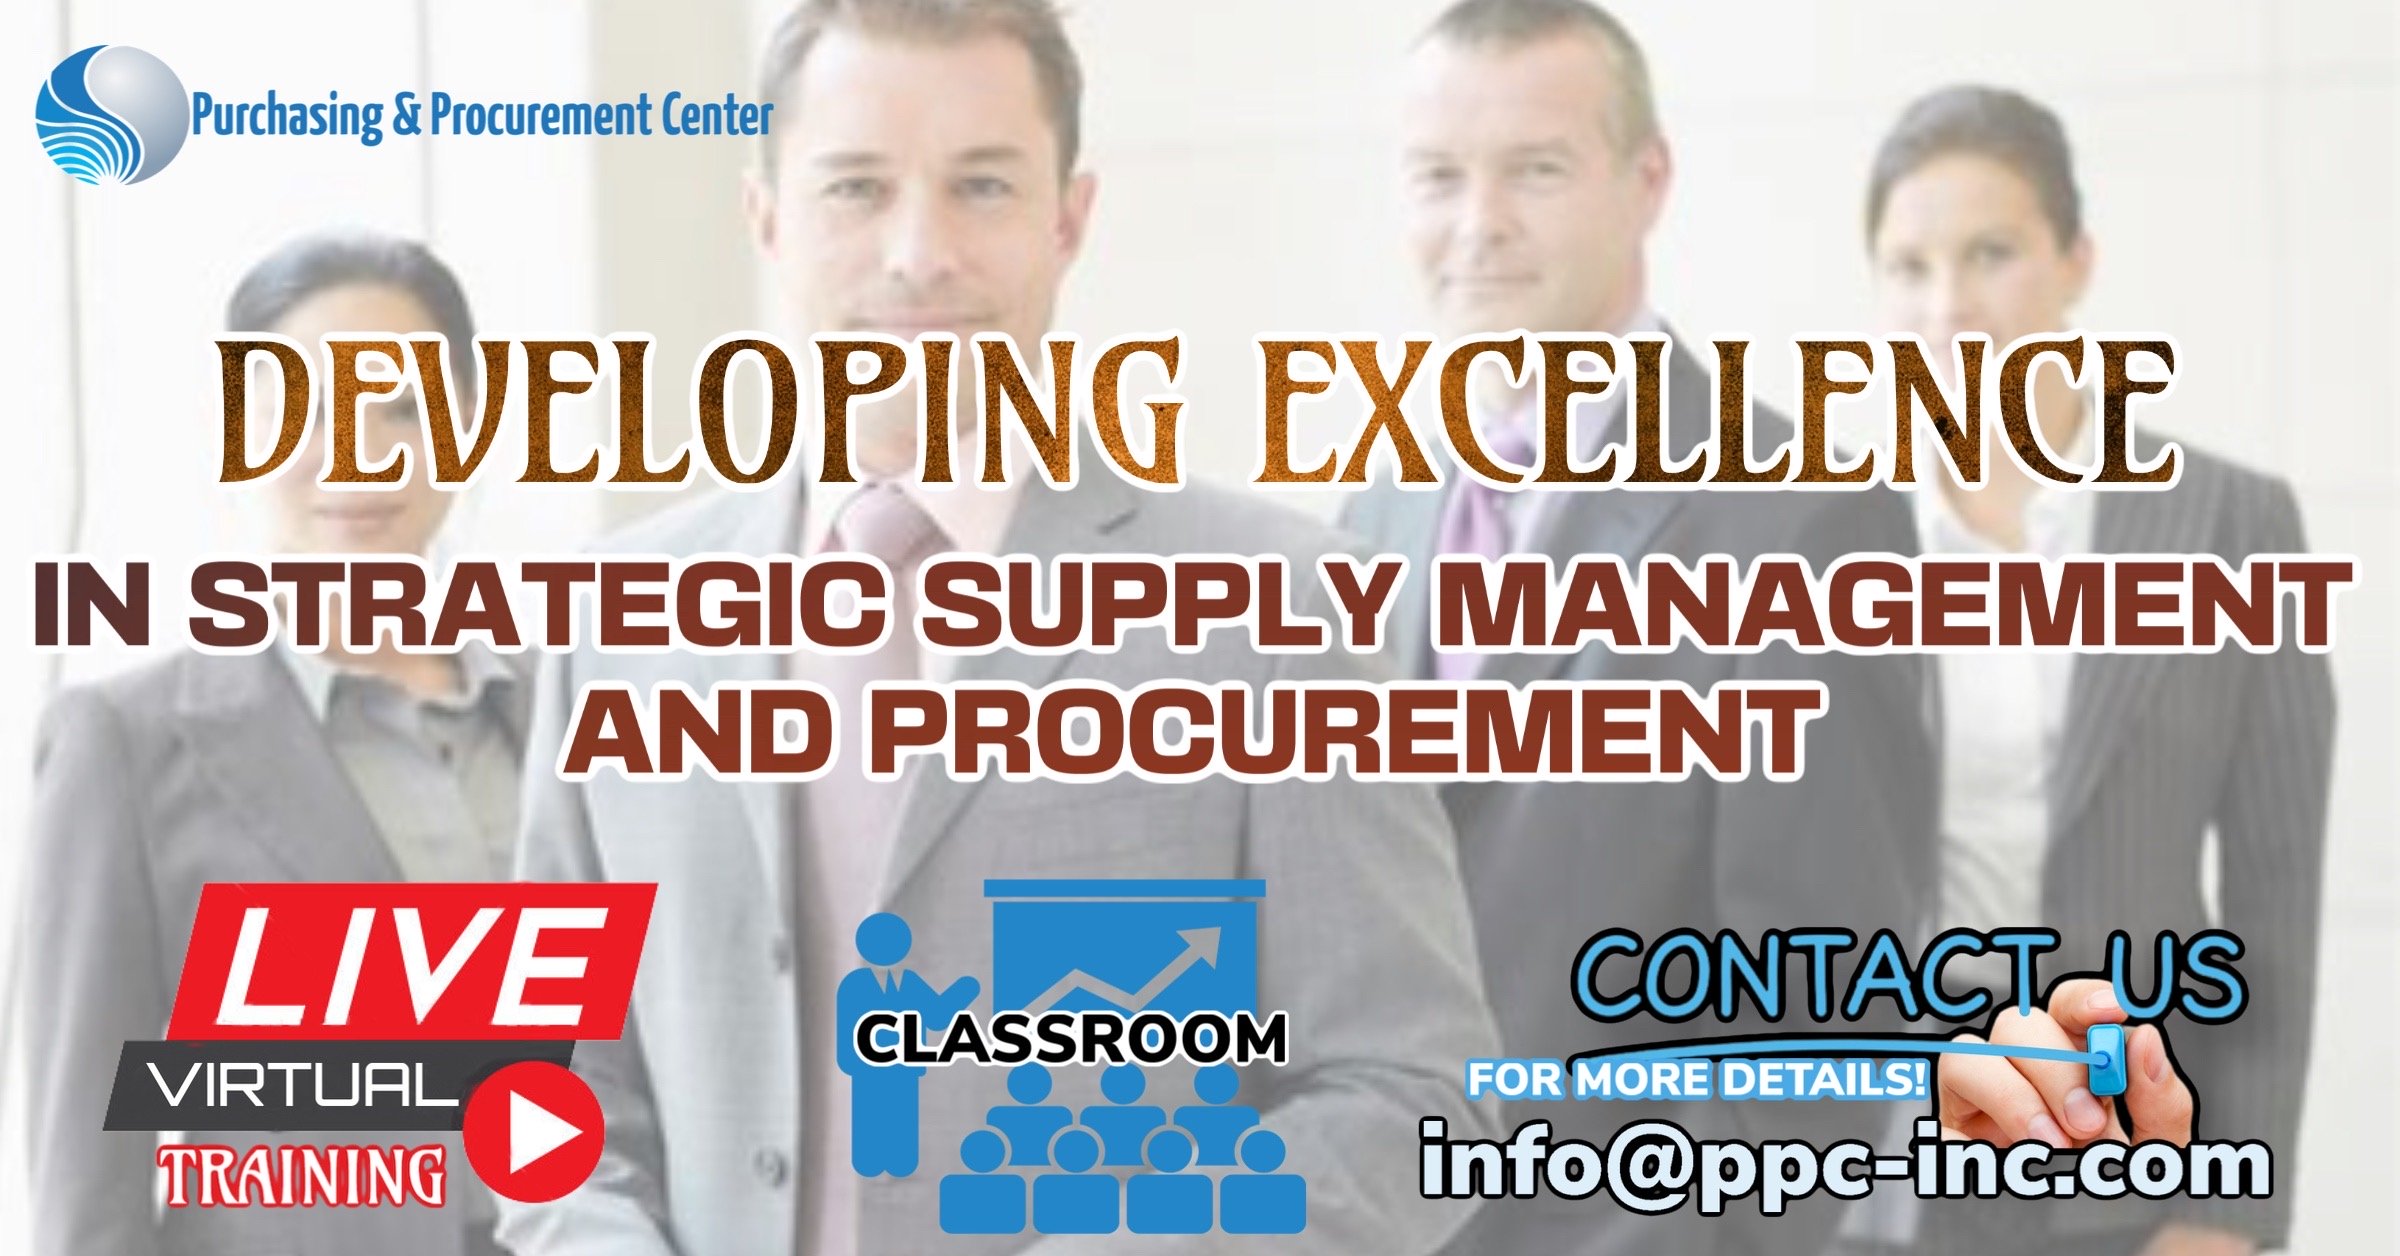 This program explores vital concepts forming the basis of strategic supply management.